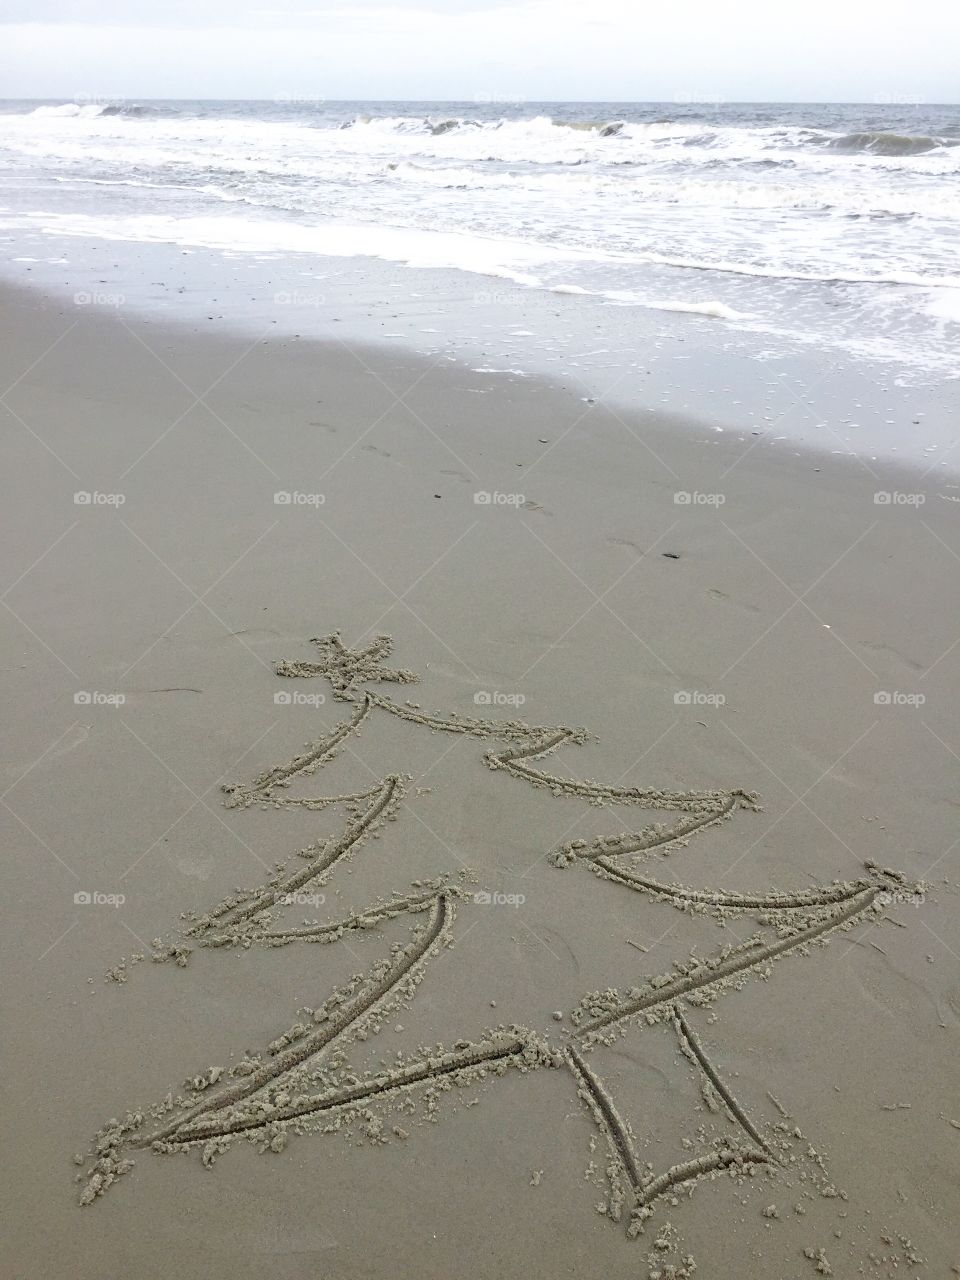 Merry Christmas from the beach!